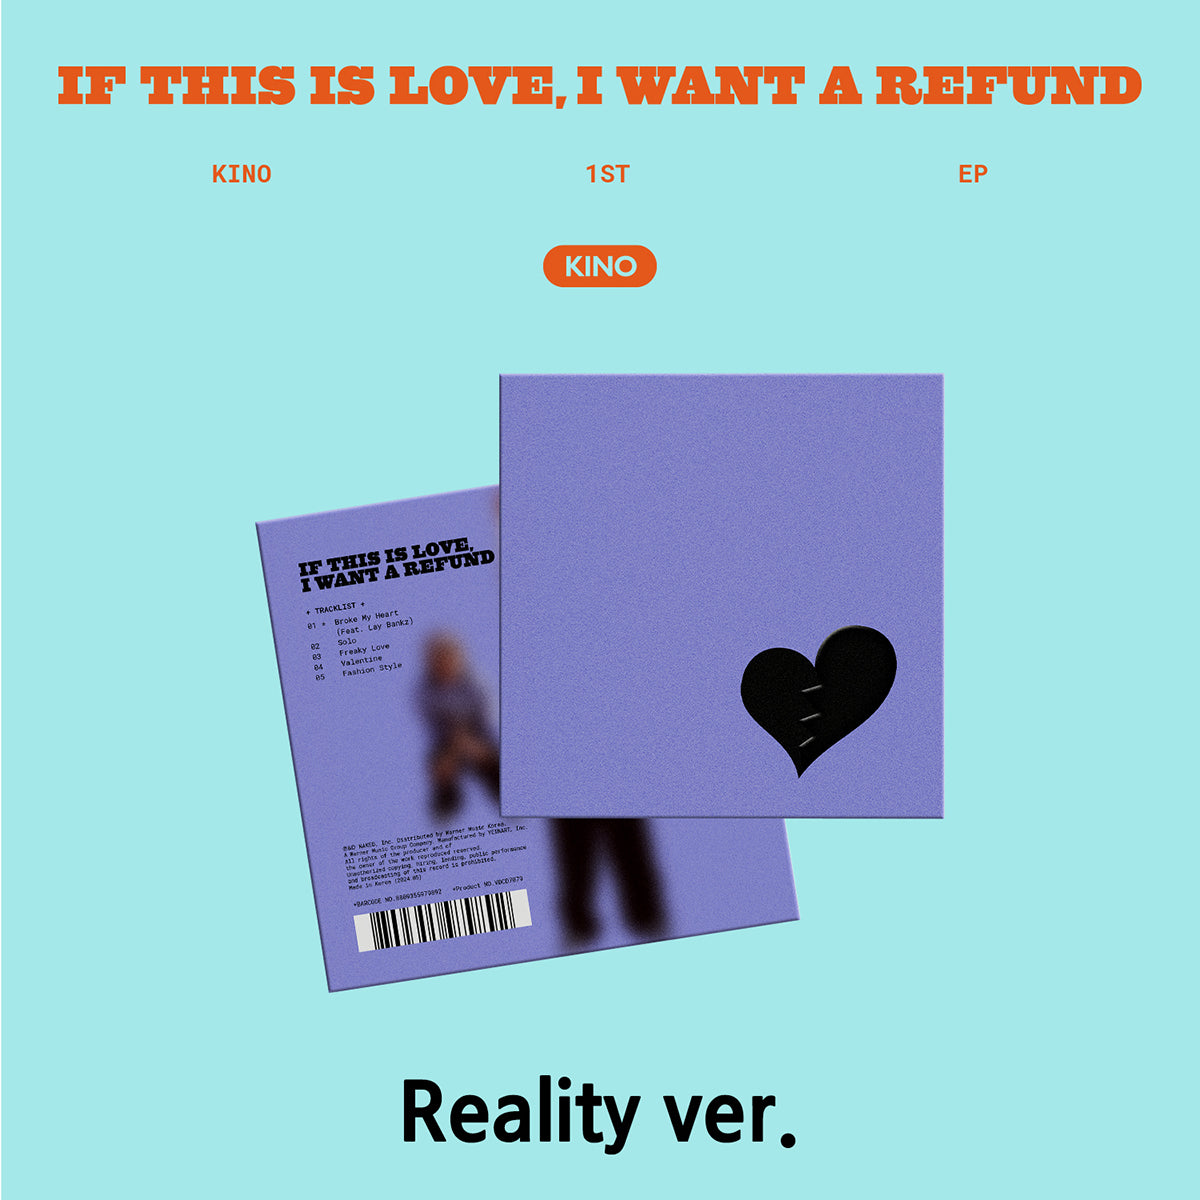 KINO - If this is love, I want a refund